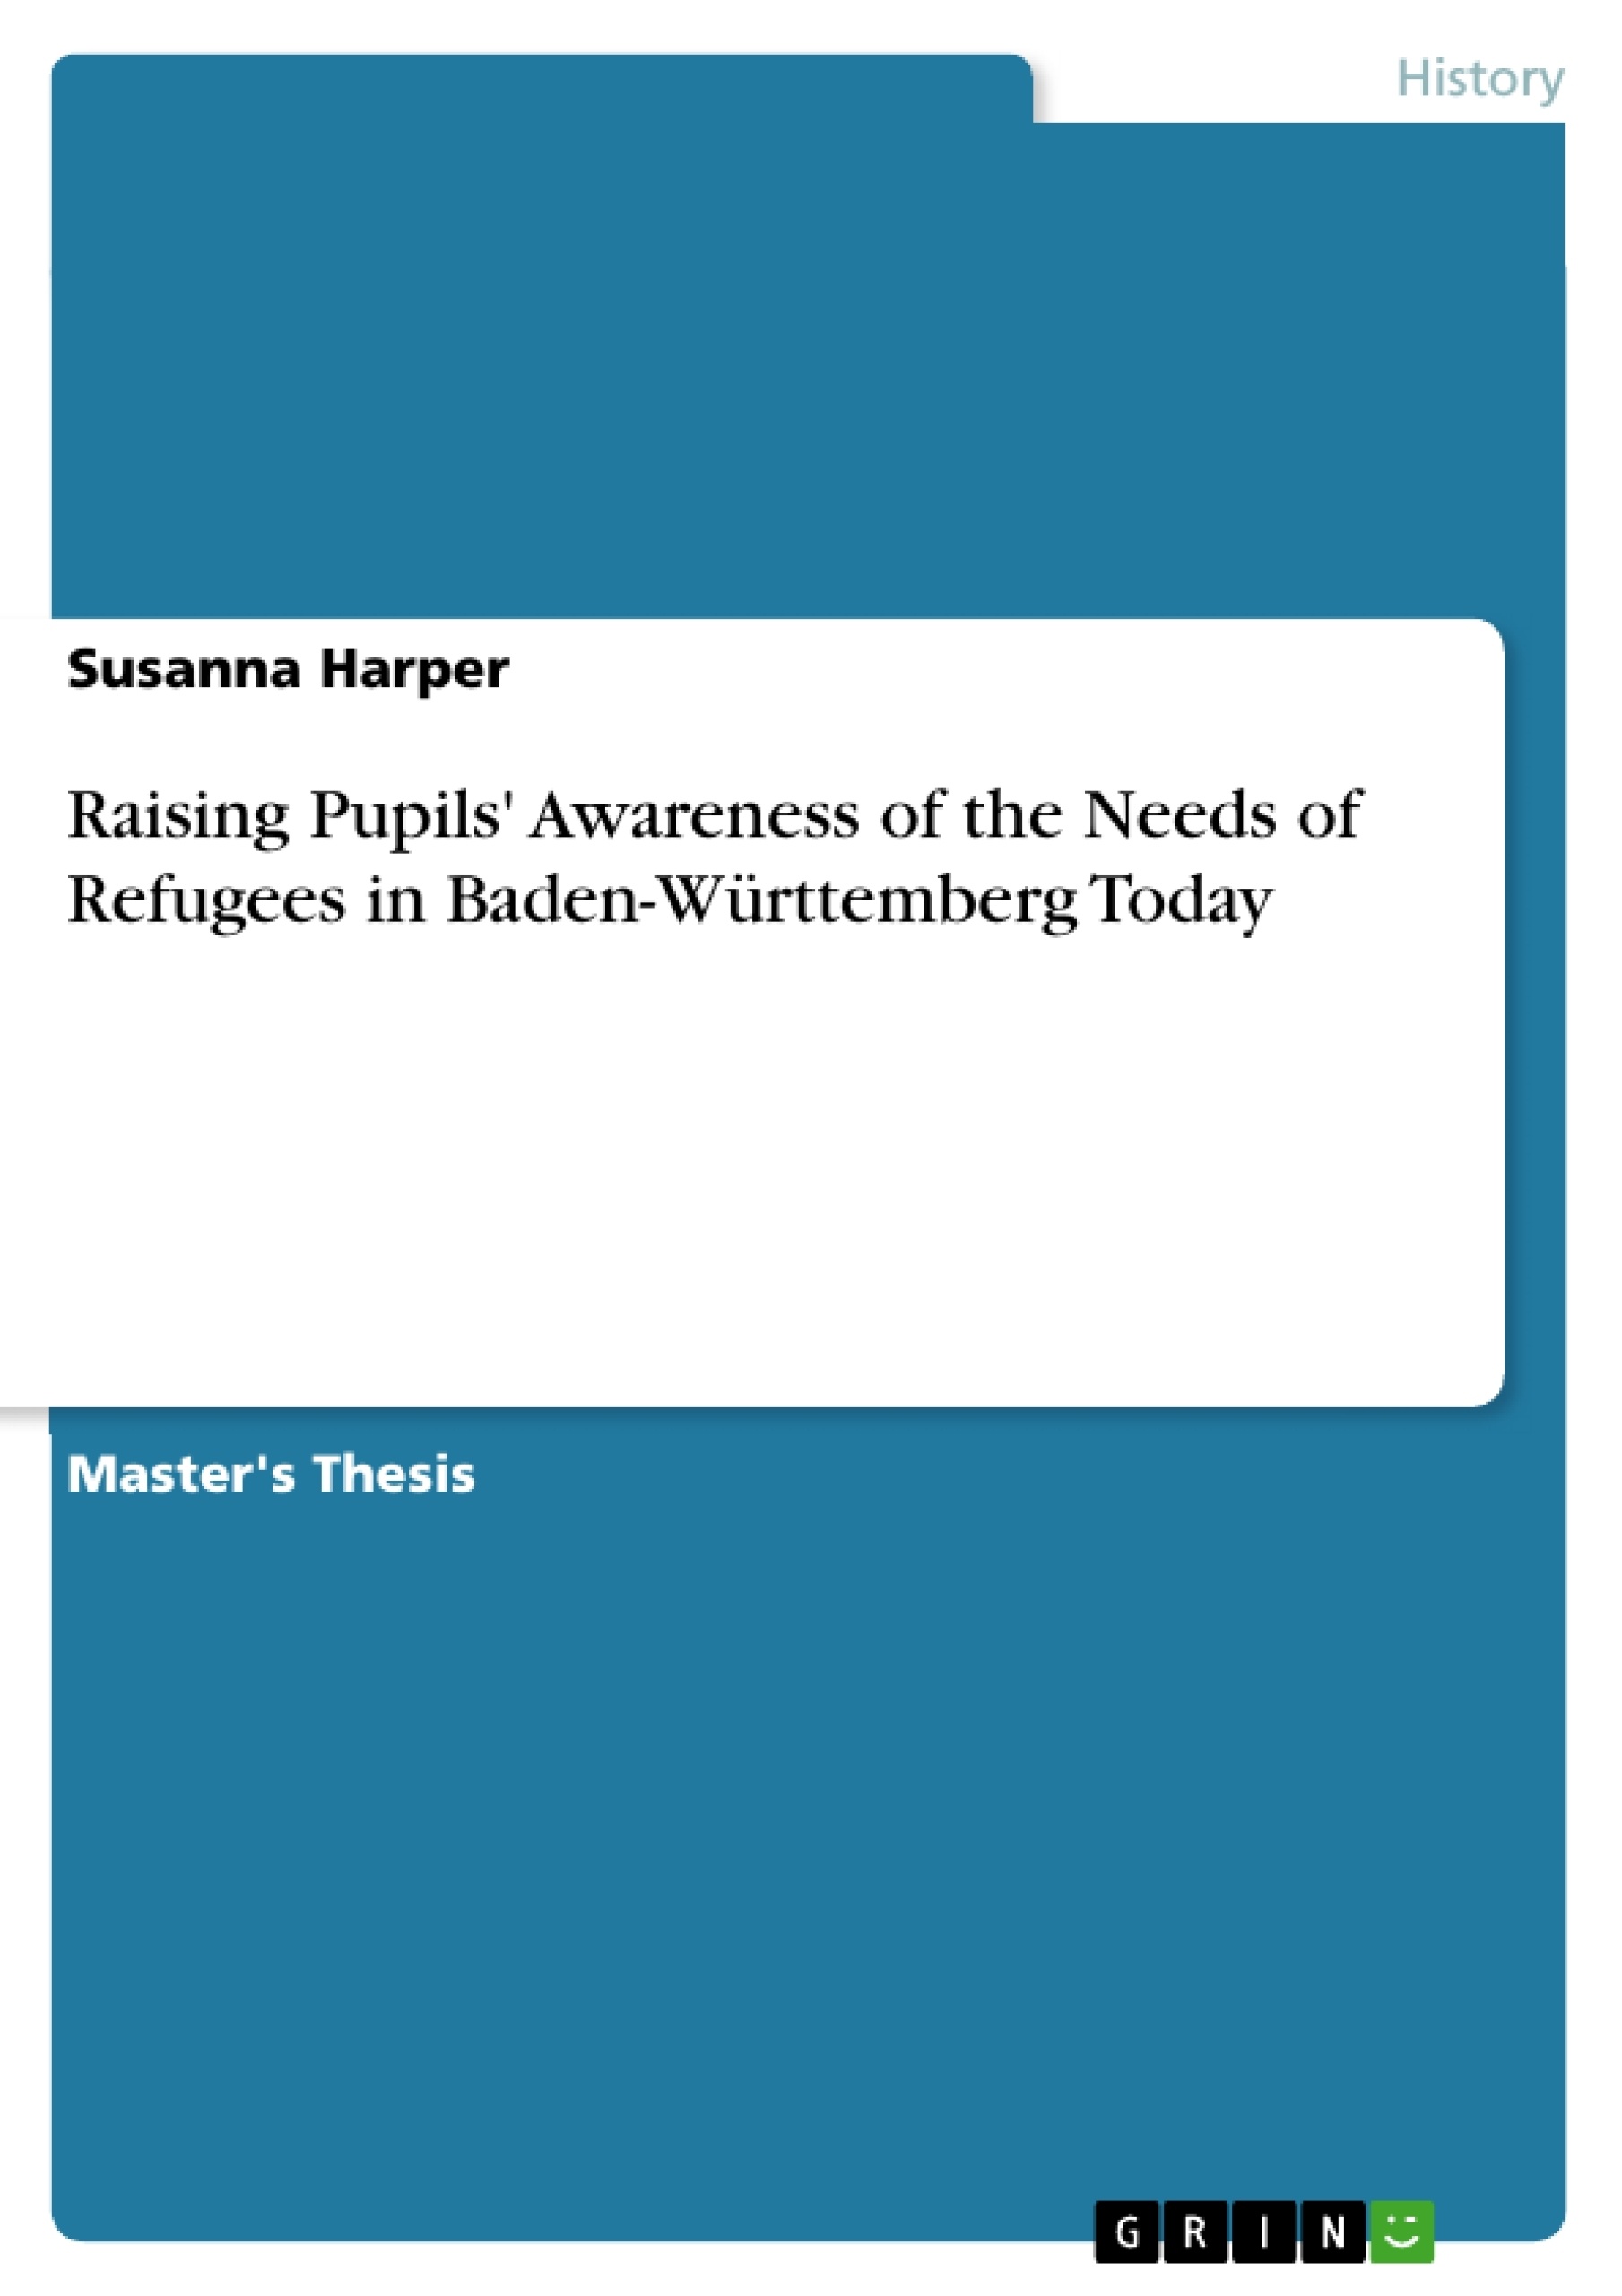 Title: Raising Pupils' Awareness of the Needs of Refugees in Baden-Württemberg Today